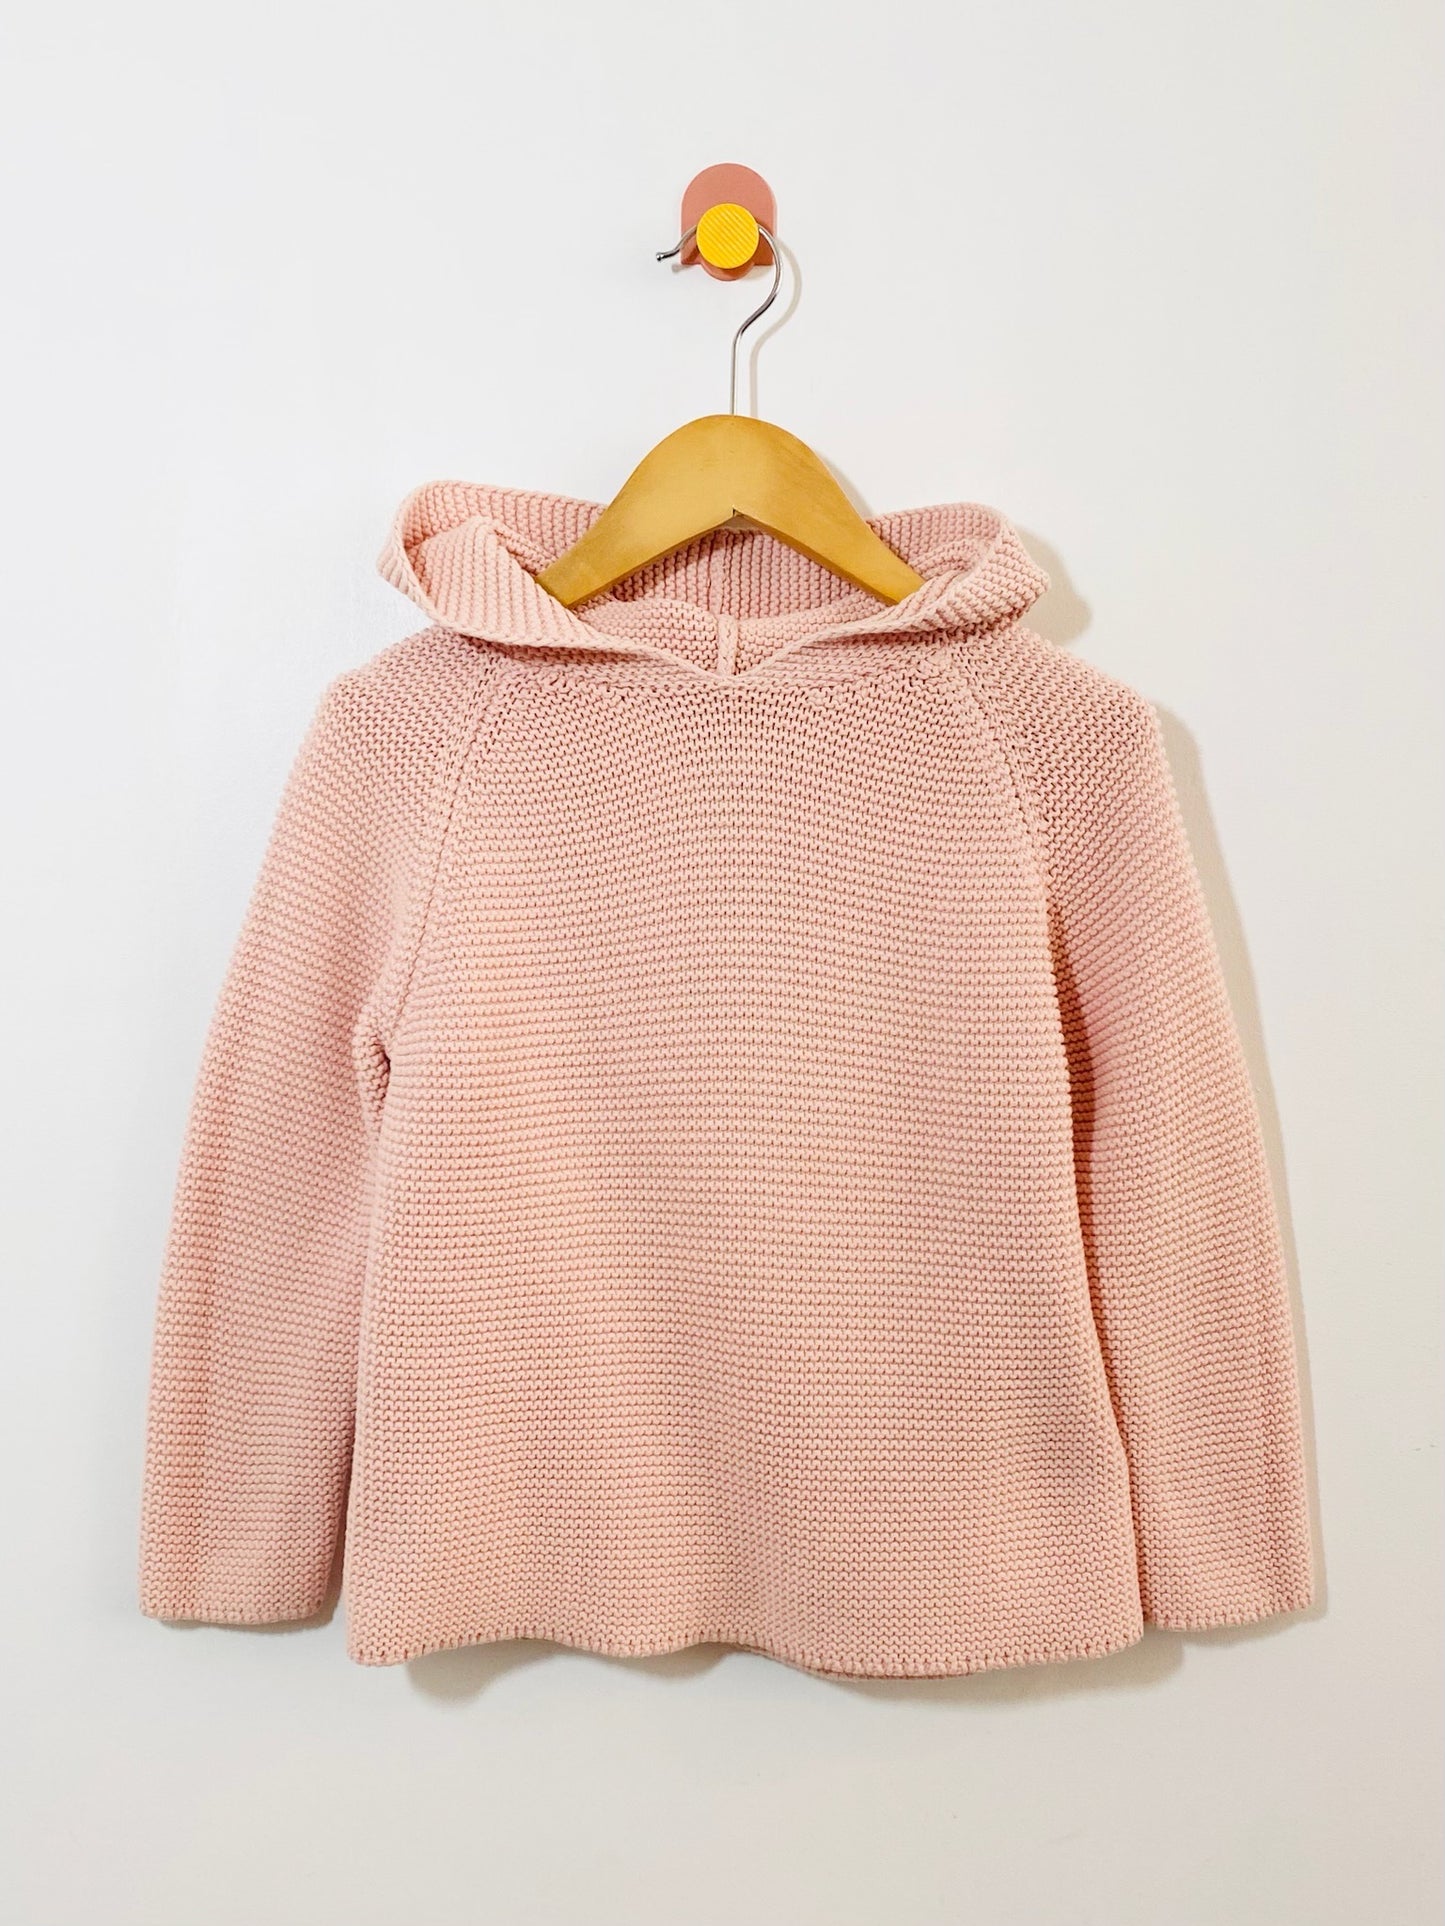 Oeuf hooded sweater / 6y 